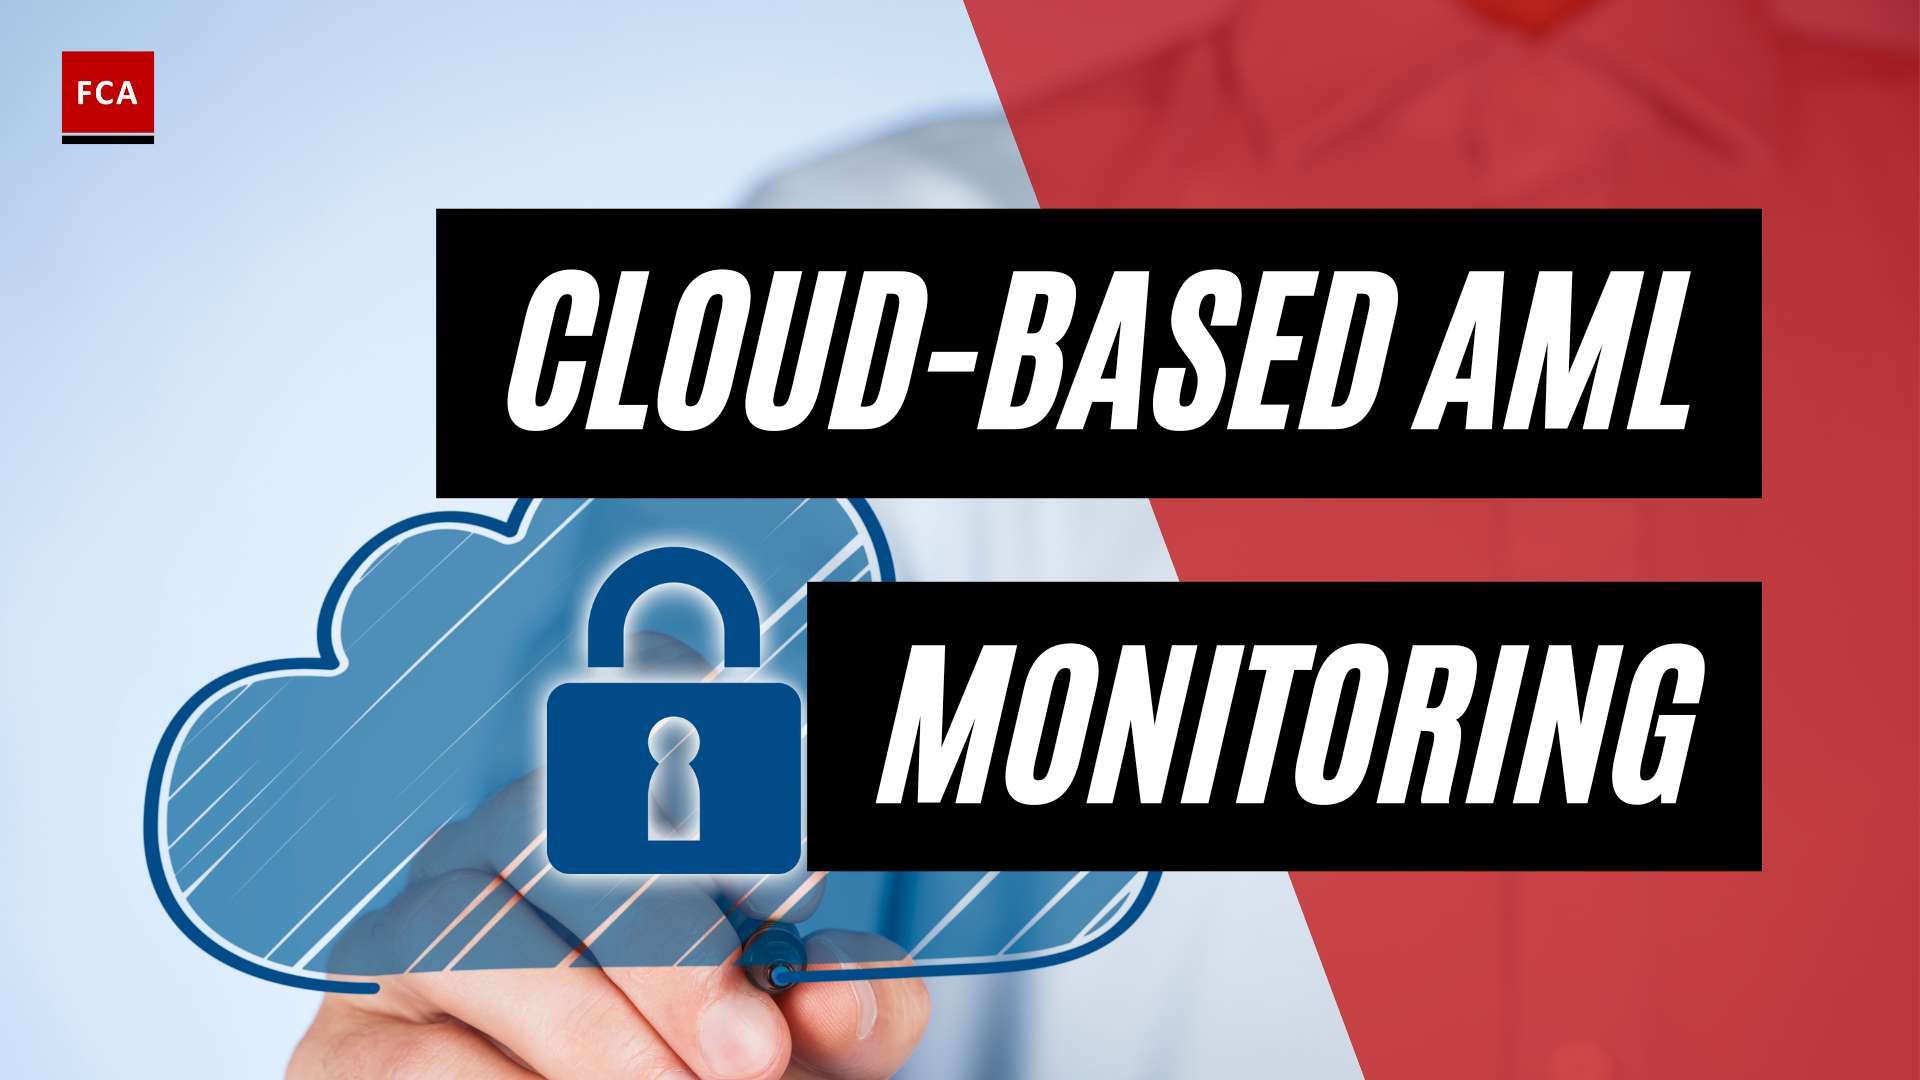 Embrace The Cloud: Strengthening Aml Efforts With Transaction Monitoring